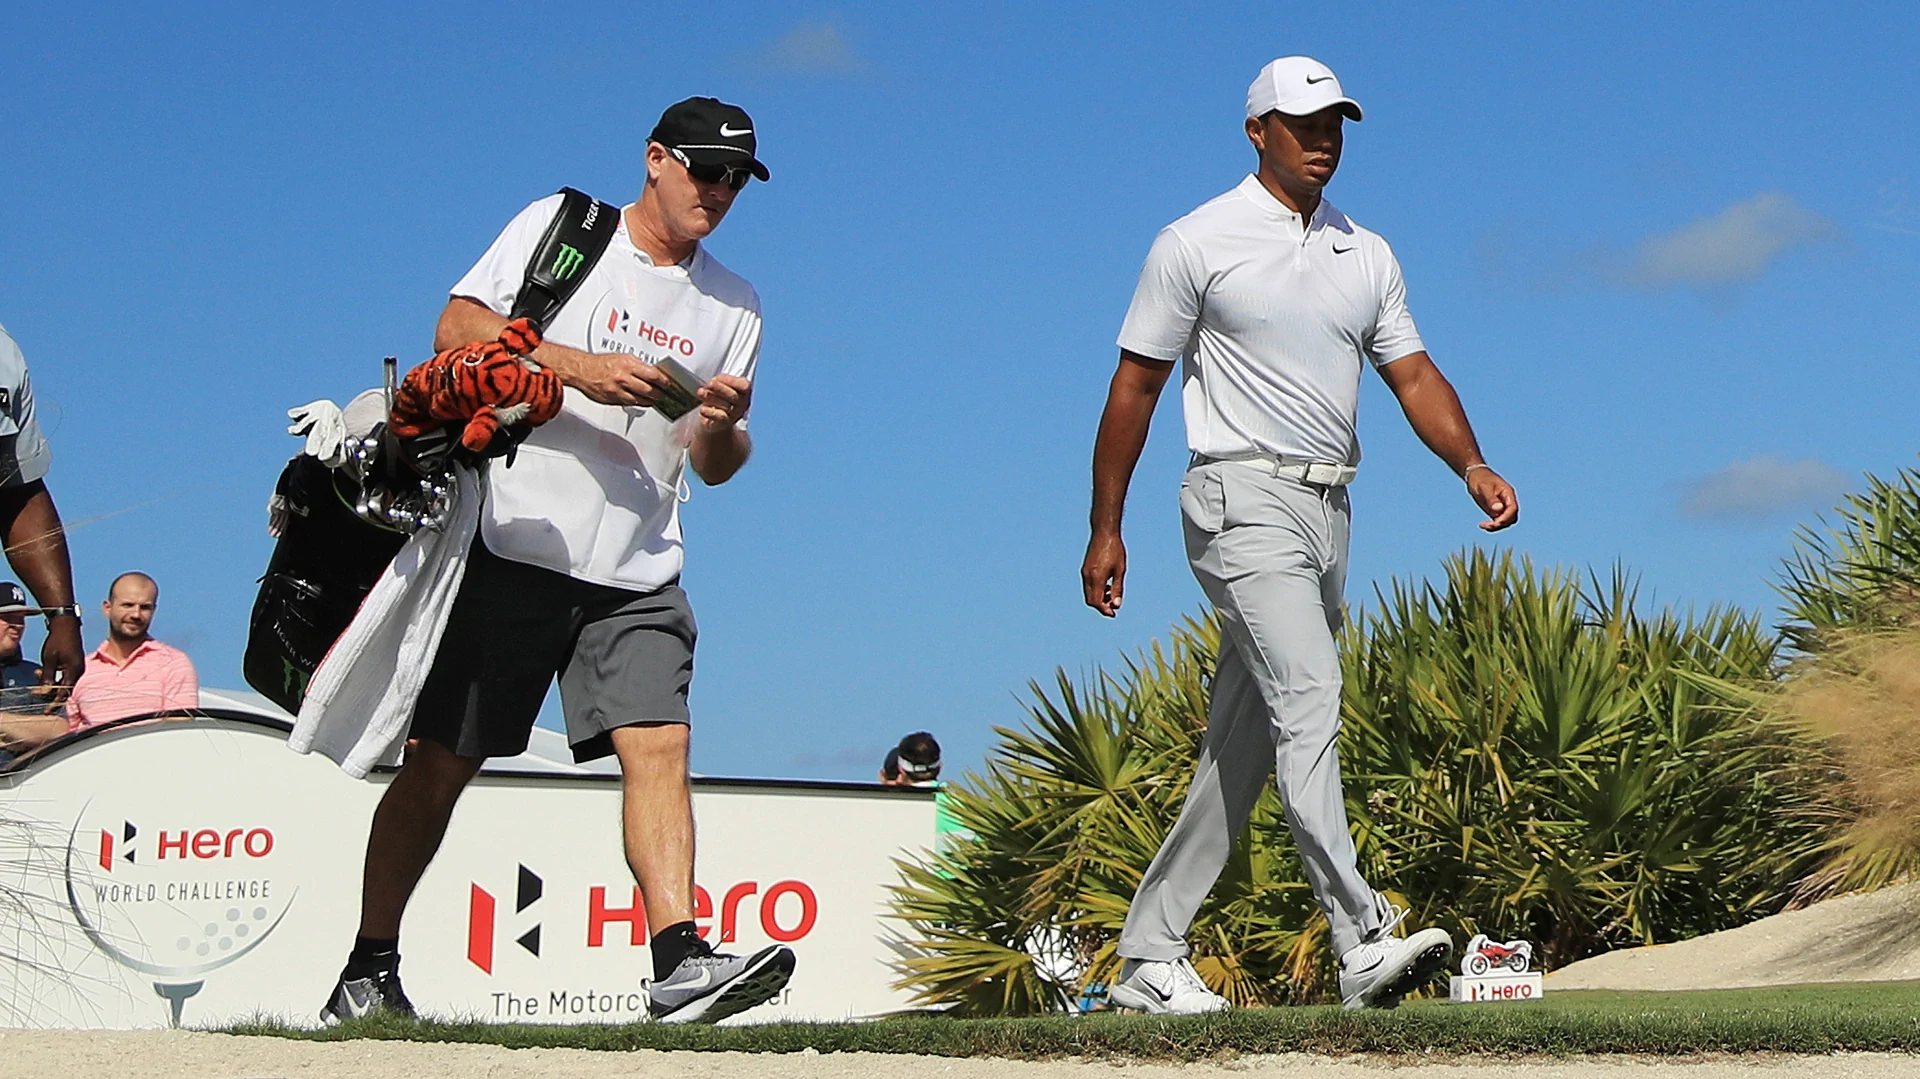 LaCava told Tiger: 'You played good all day'